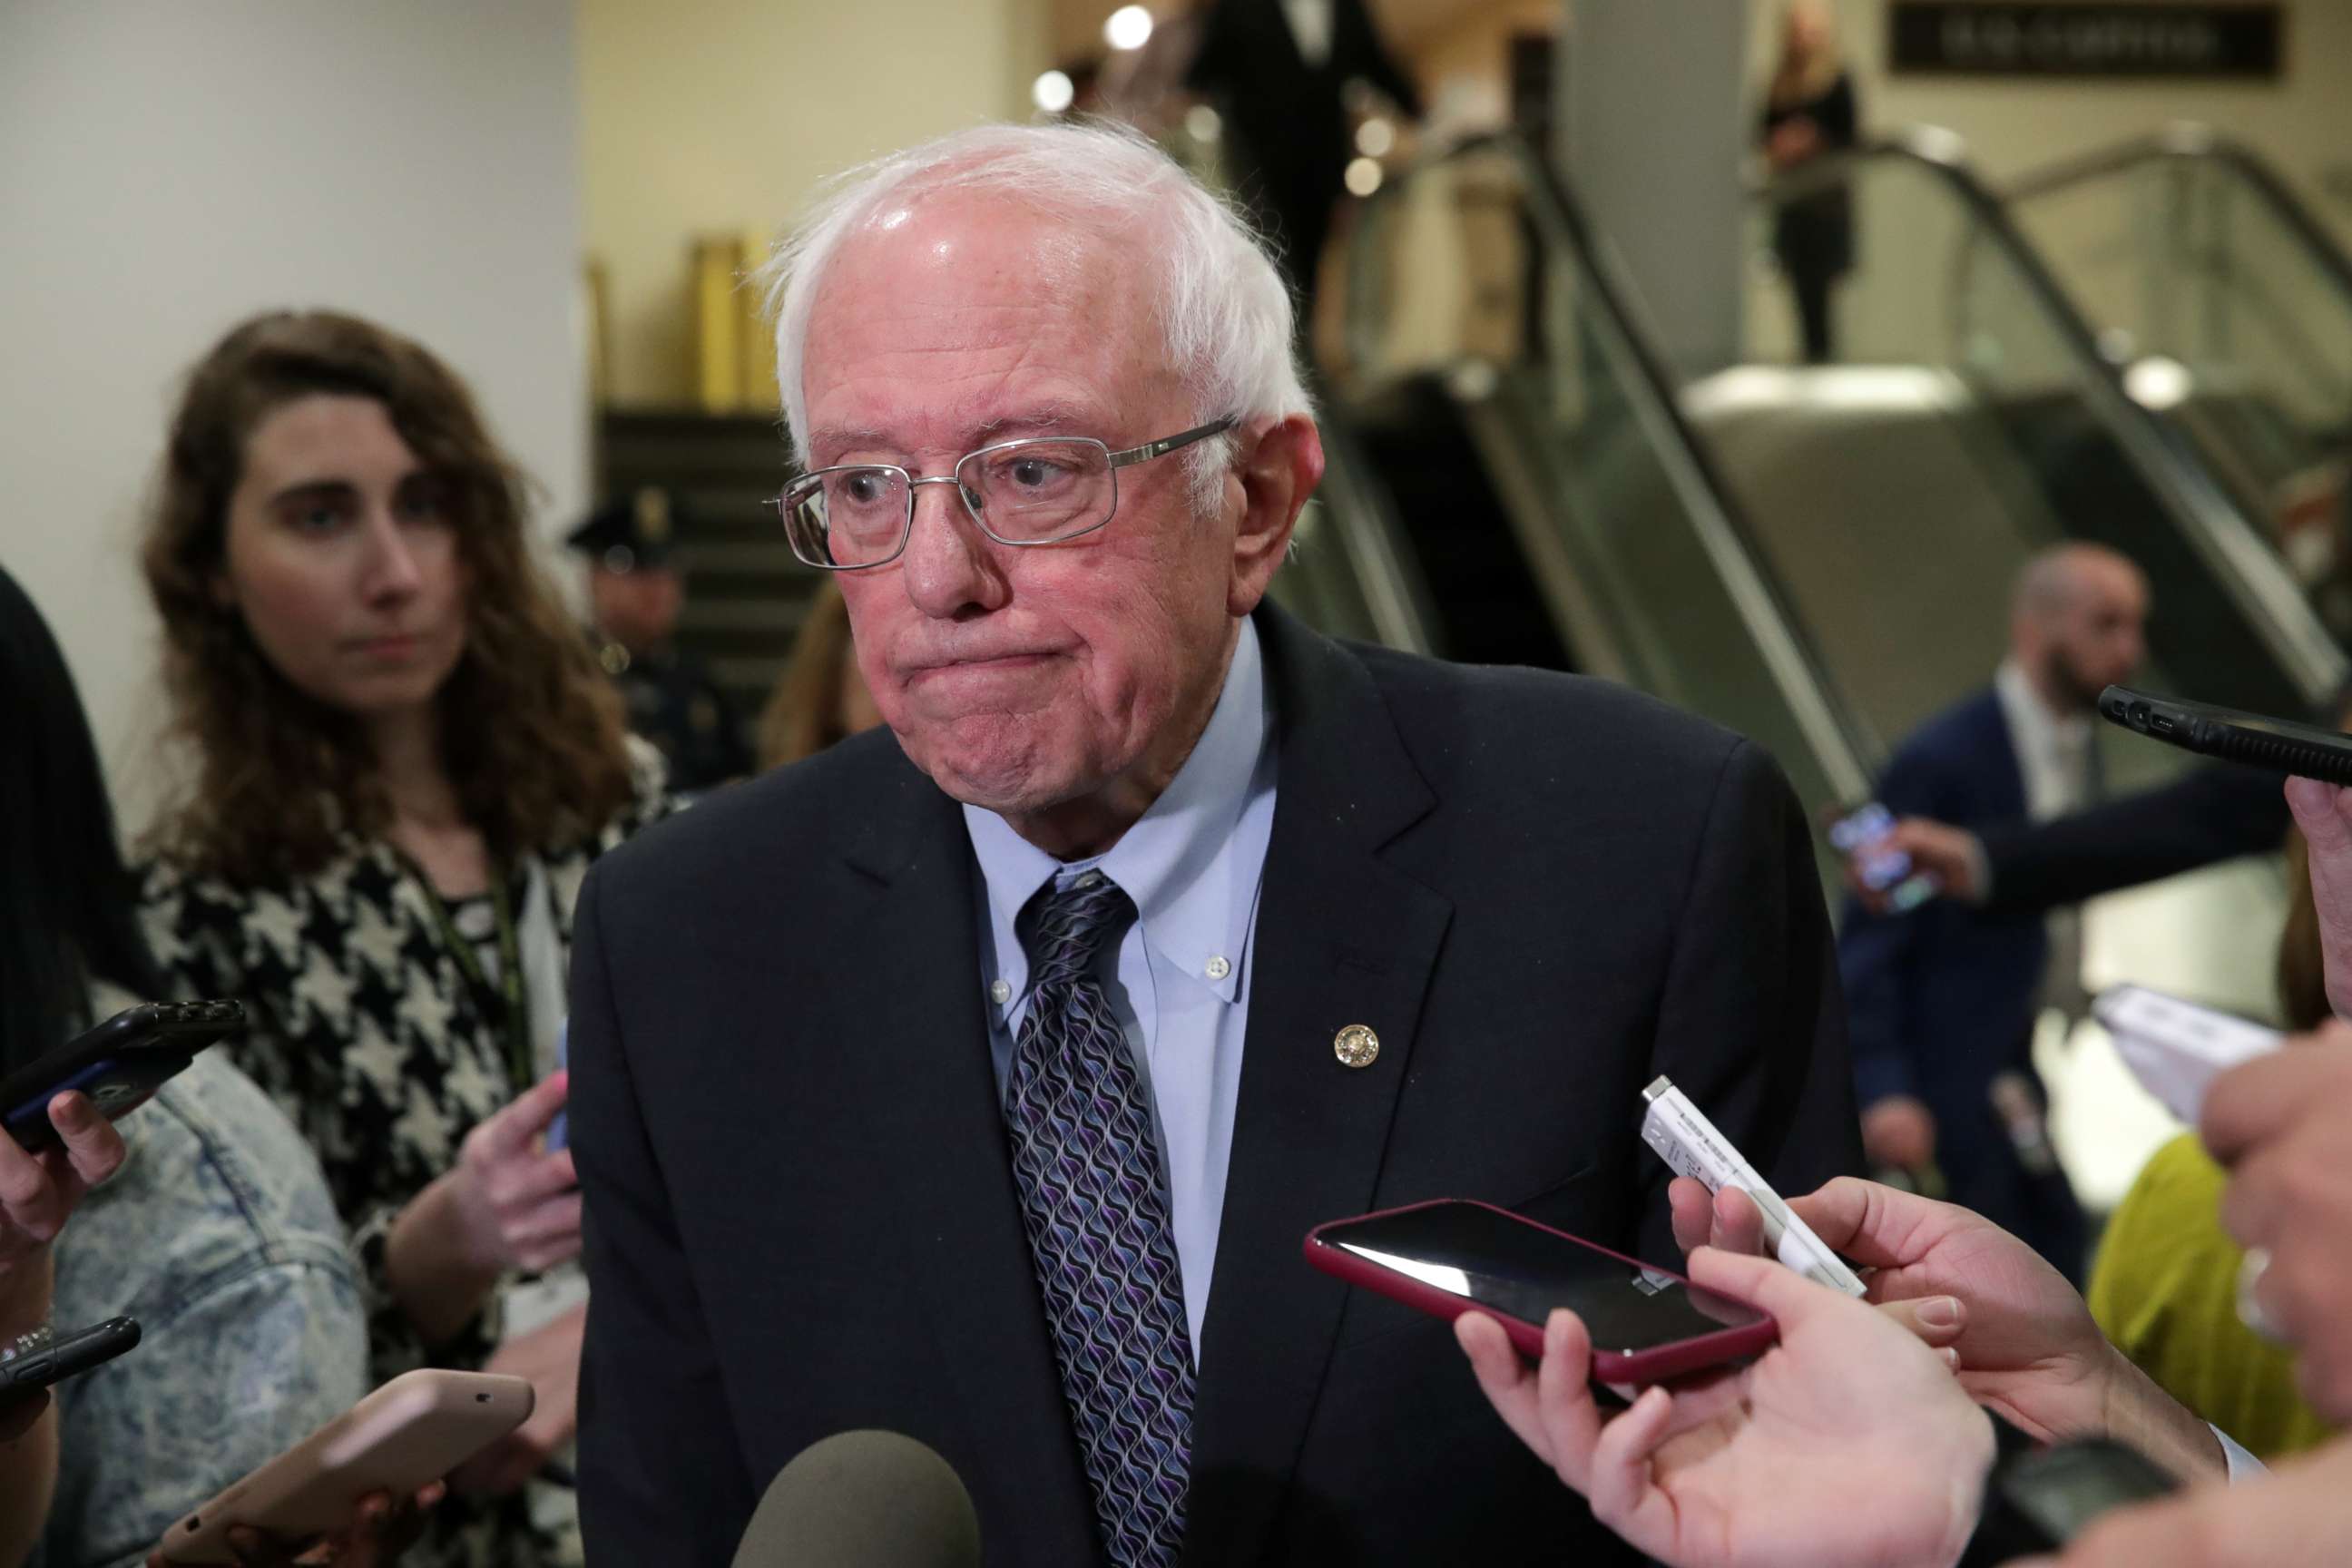 PHOTO: Sen. Bernie Sanders talks to reporters during a break in the procedural start of the Senate impeachment trial of President Donald Trump at the Capitol in Washington, Jan. 16, 2020.